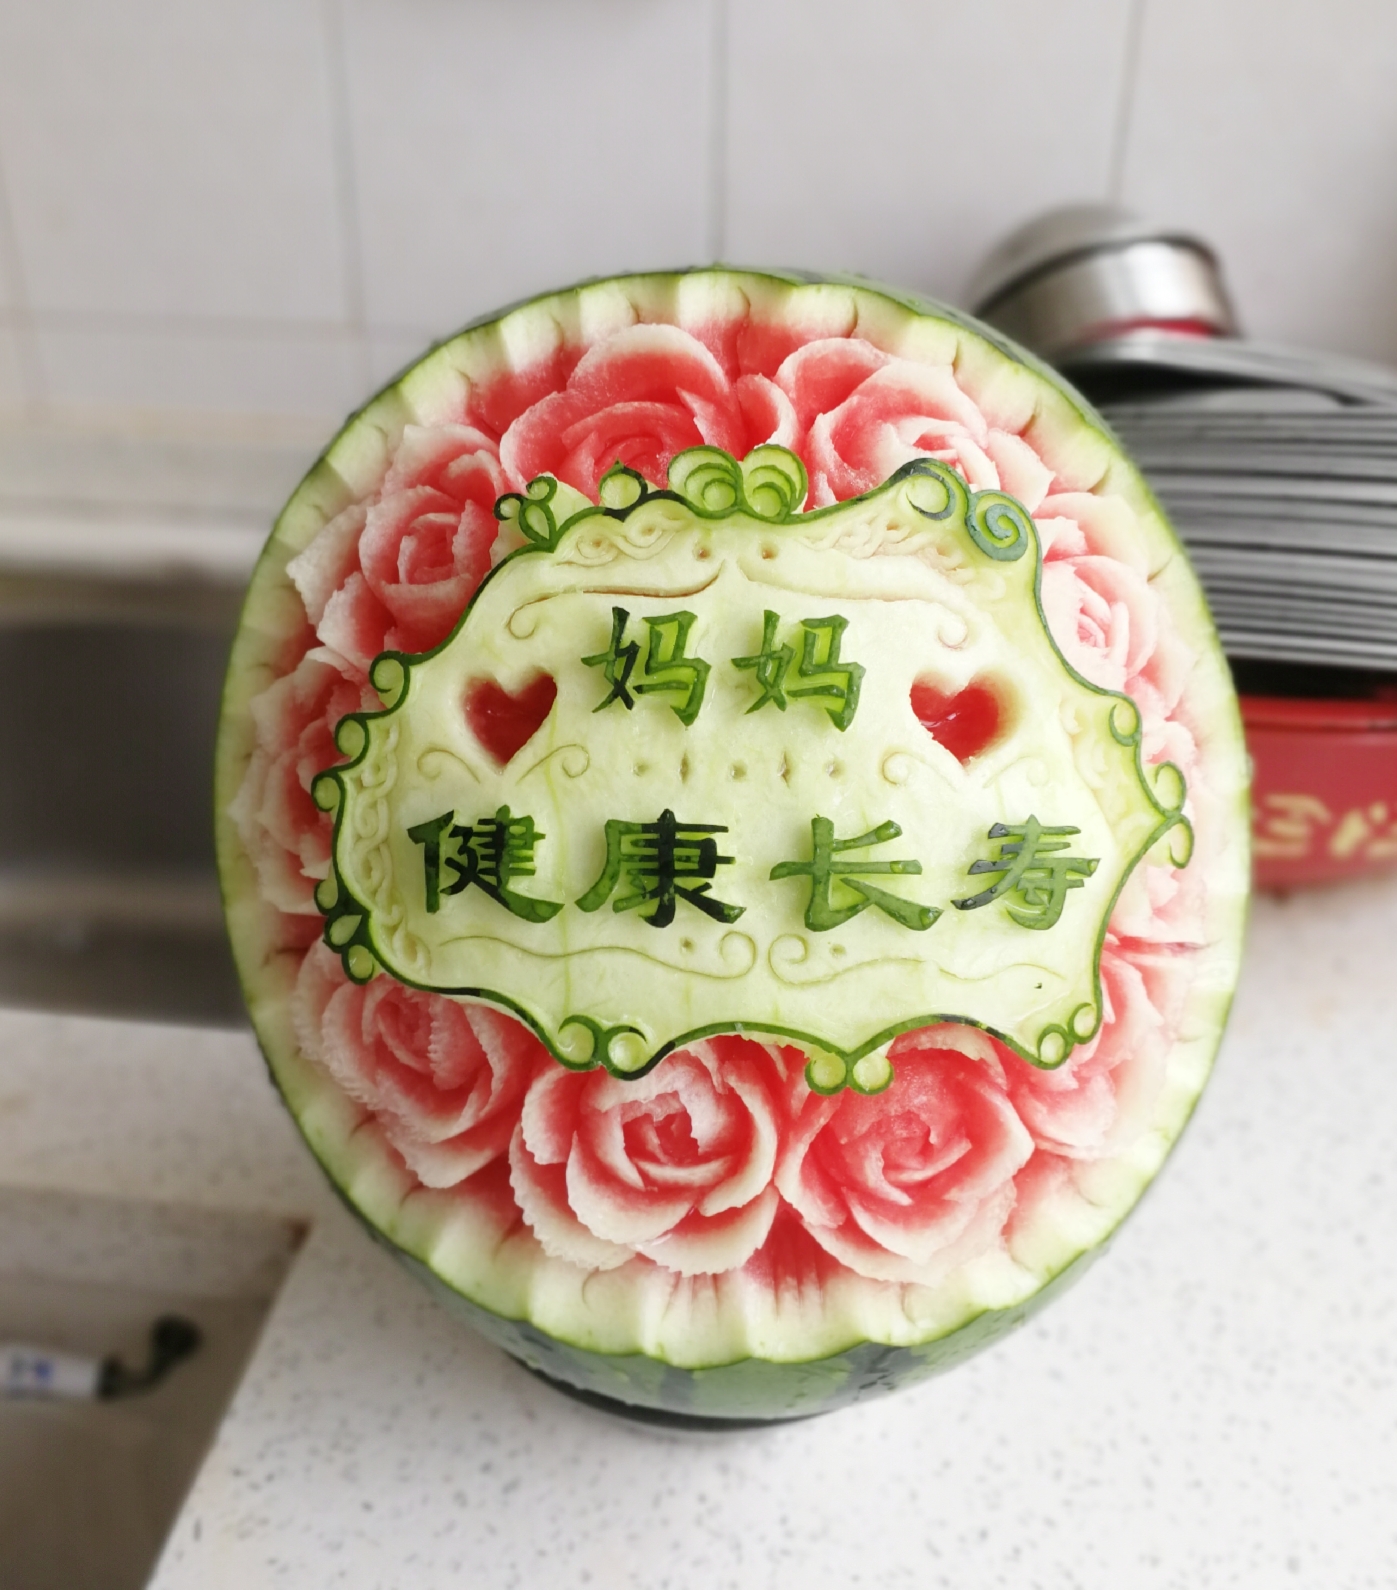 ItalyPaul - Art In Fruit & Vegetable Carving Lessons: 用西瓜雕刻的艺术品: 西瓜雕刻小鸟 ...